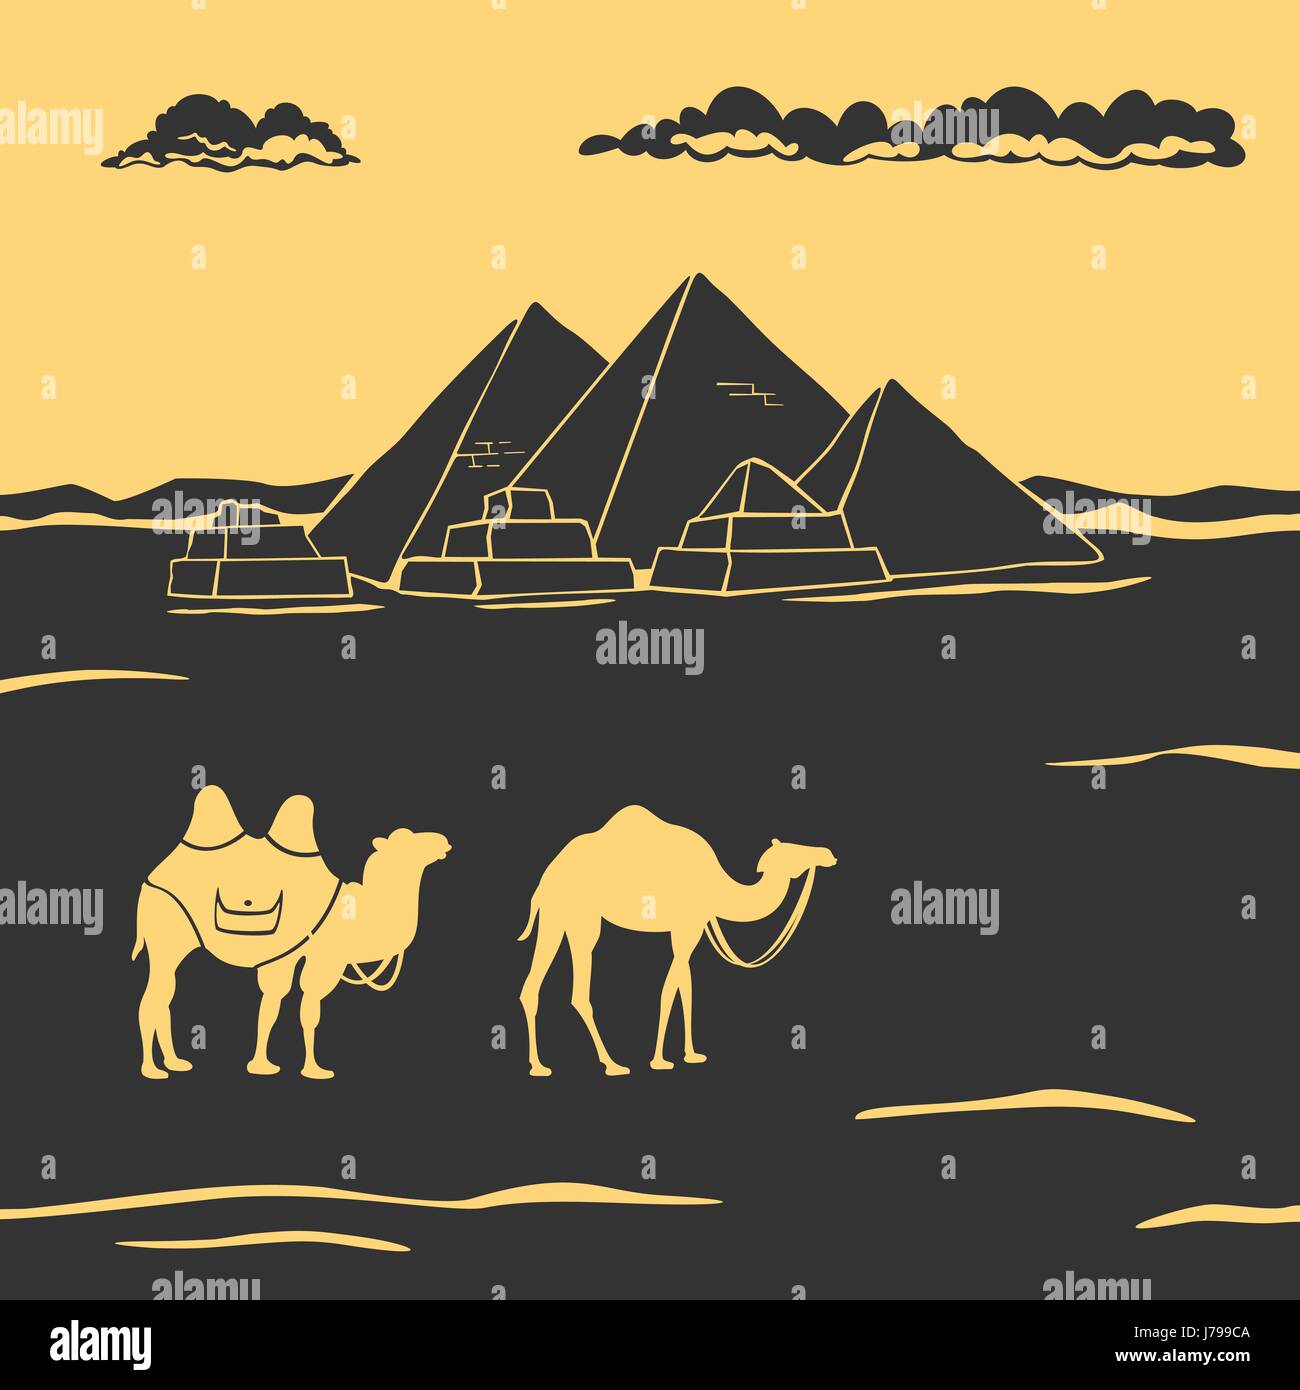 Egyptian Pyramids And Camels Vector Illustration Stock Vector